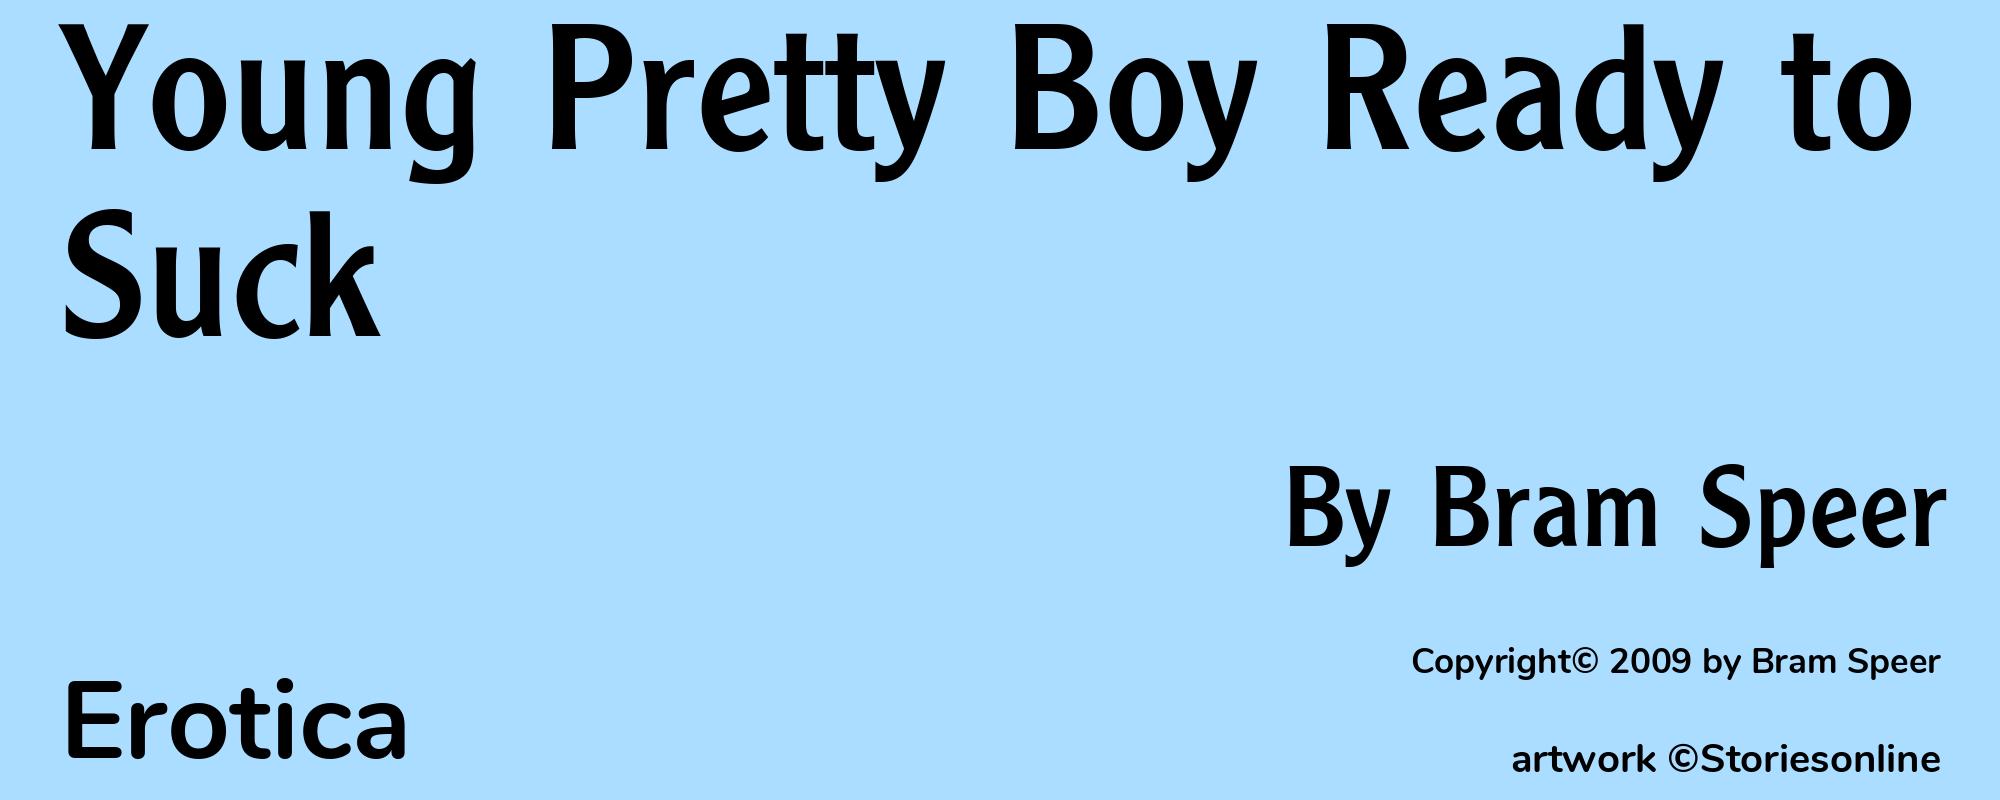 Young Pretty Boy Ready to Suck - Cover